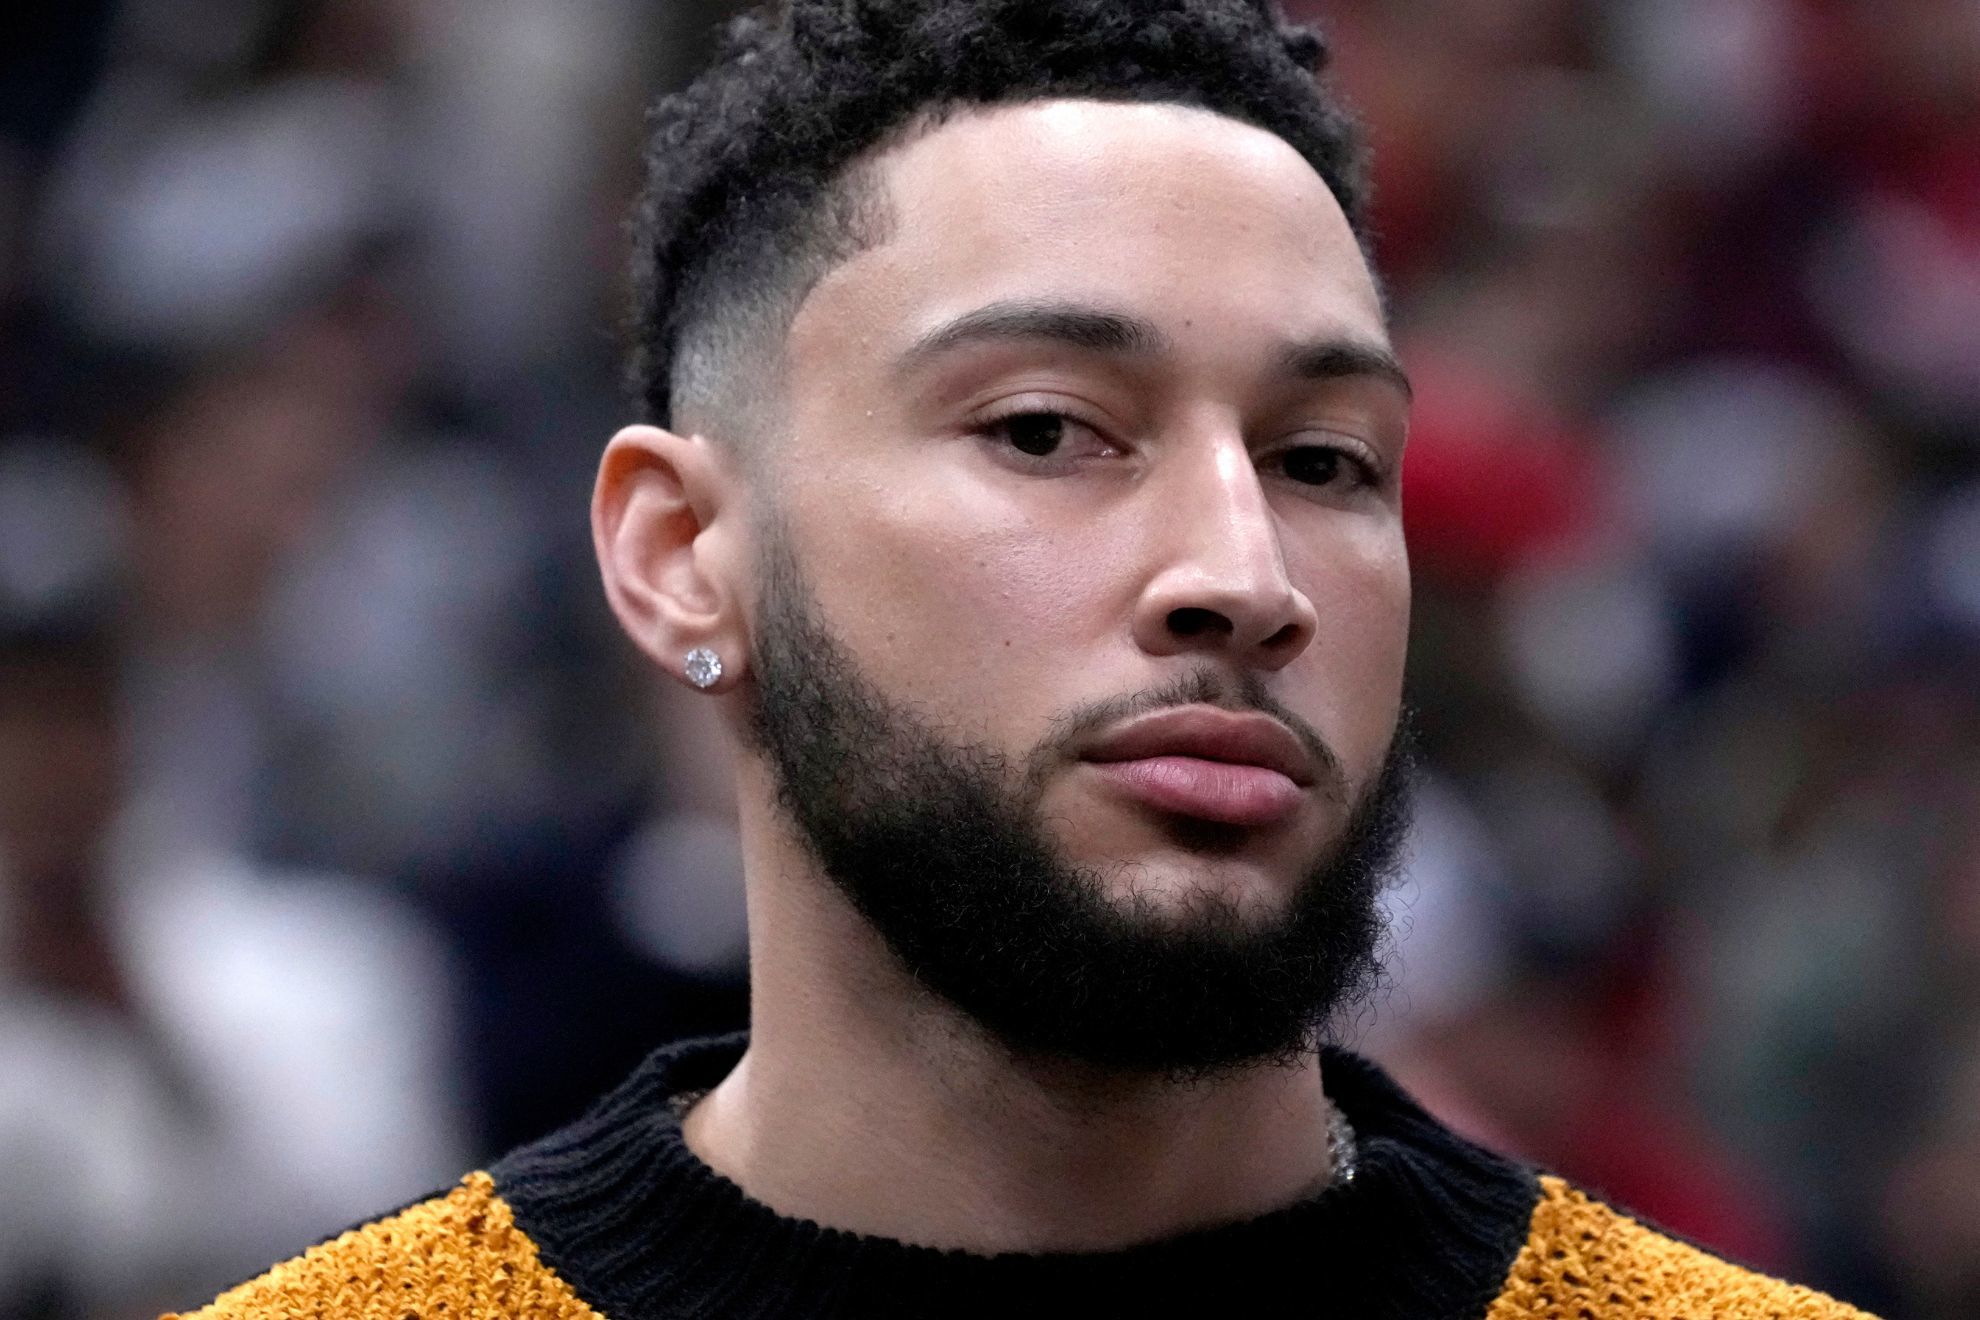 Nets guard Ben Simmons unlikely to return this season